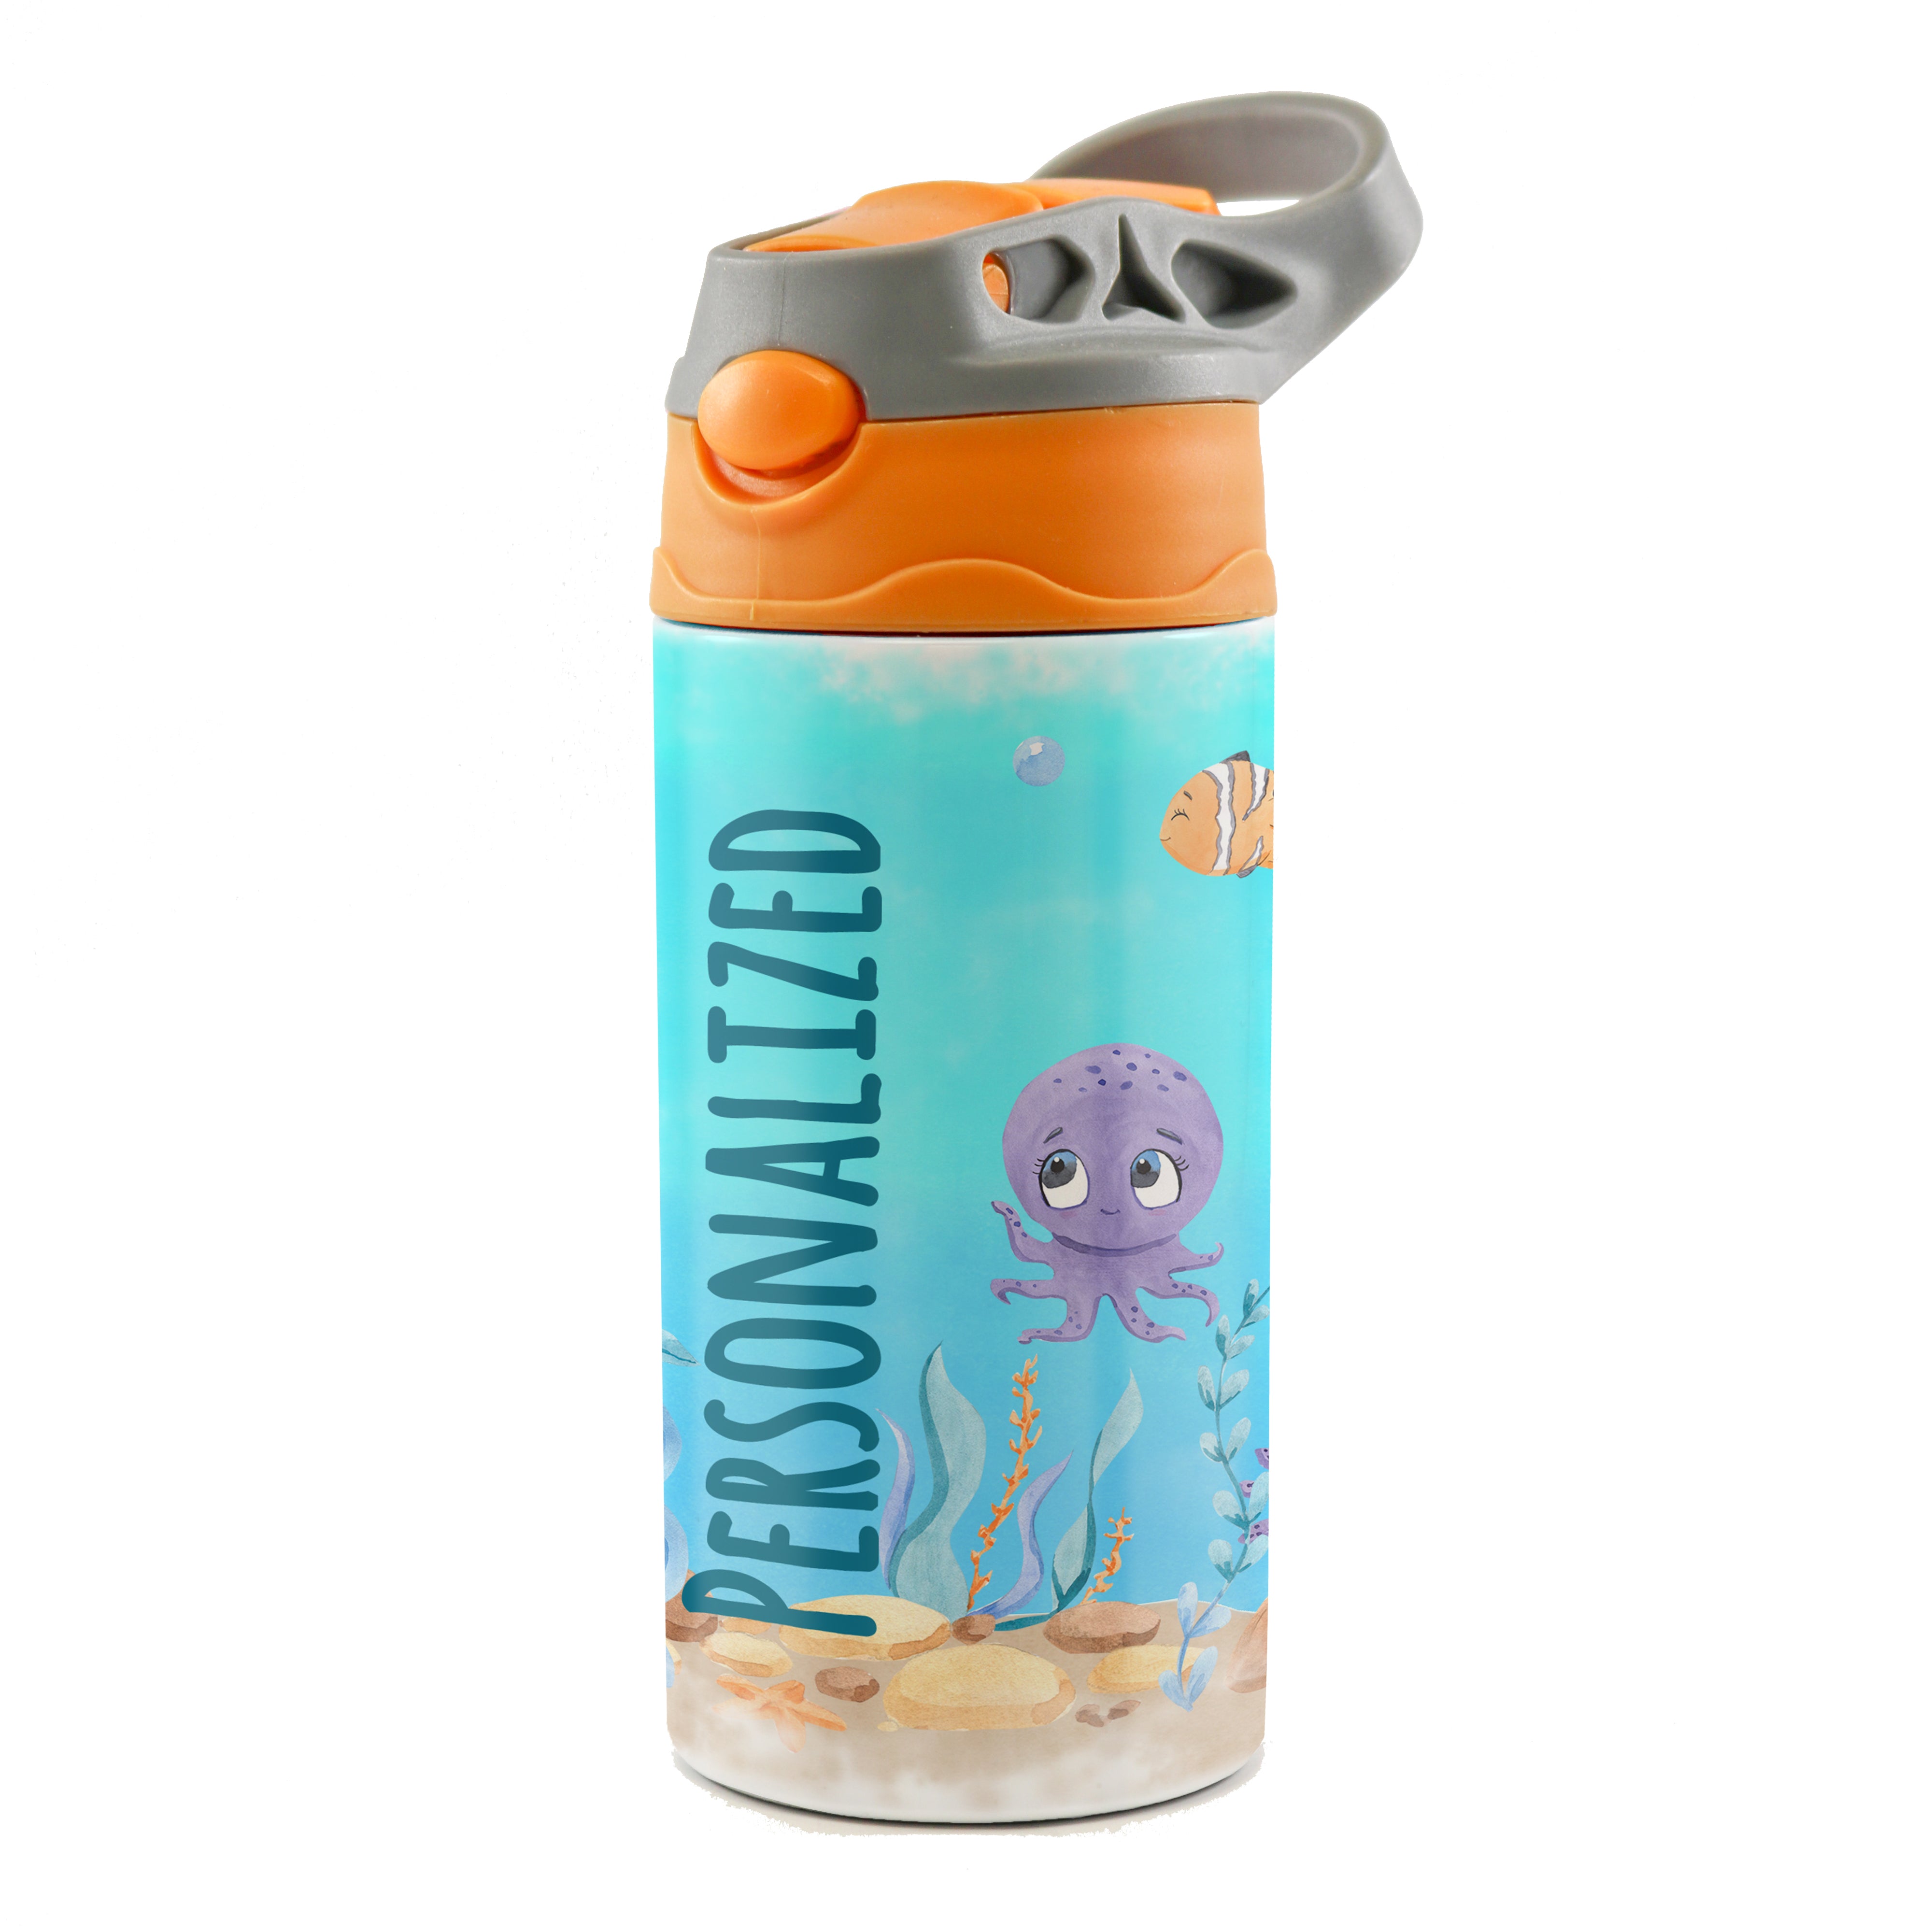 Trend Setters Original (Sea Life - Personalize with Name) 12 oz Stainless Steel Water Bottle with Orange and Grey Lid